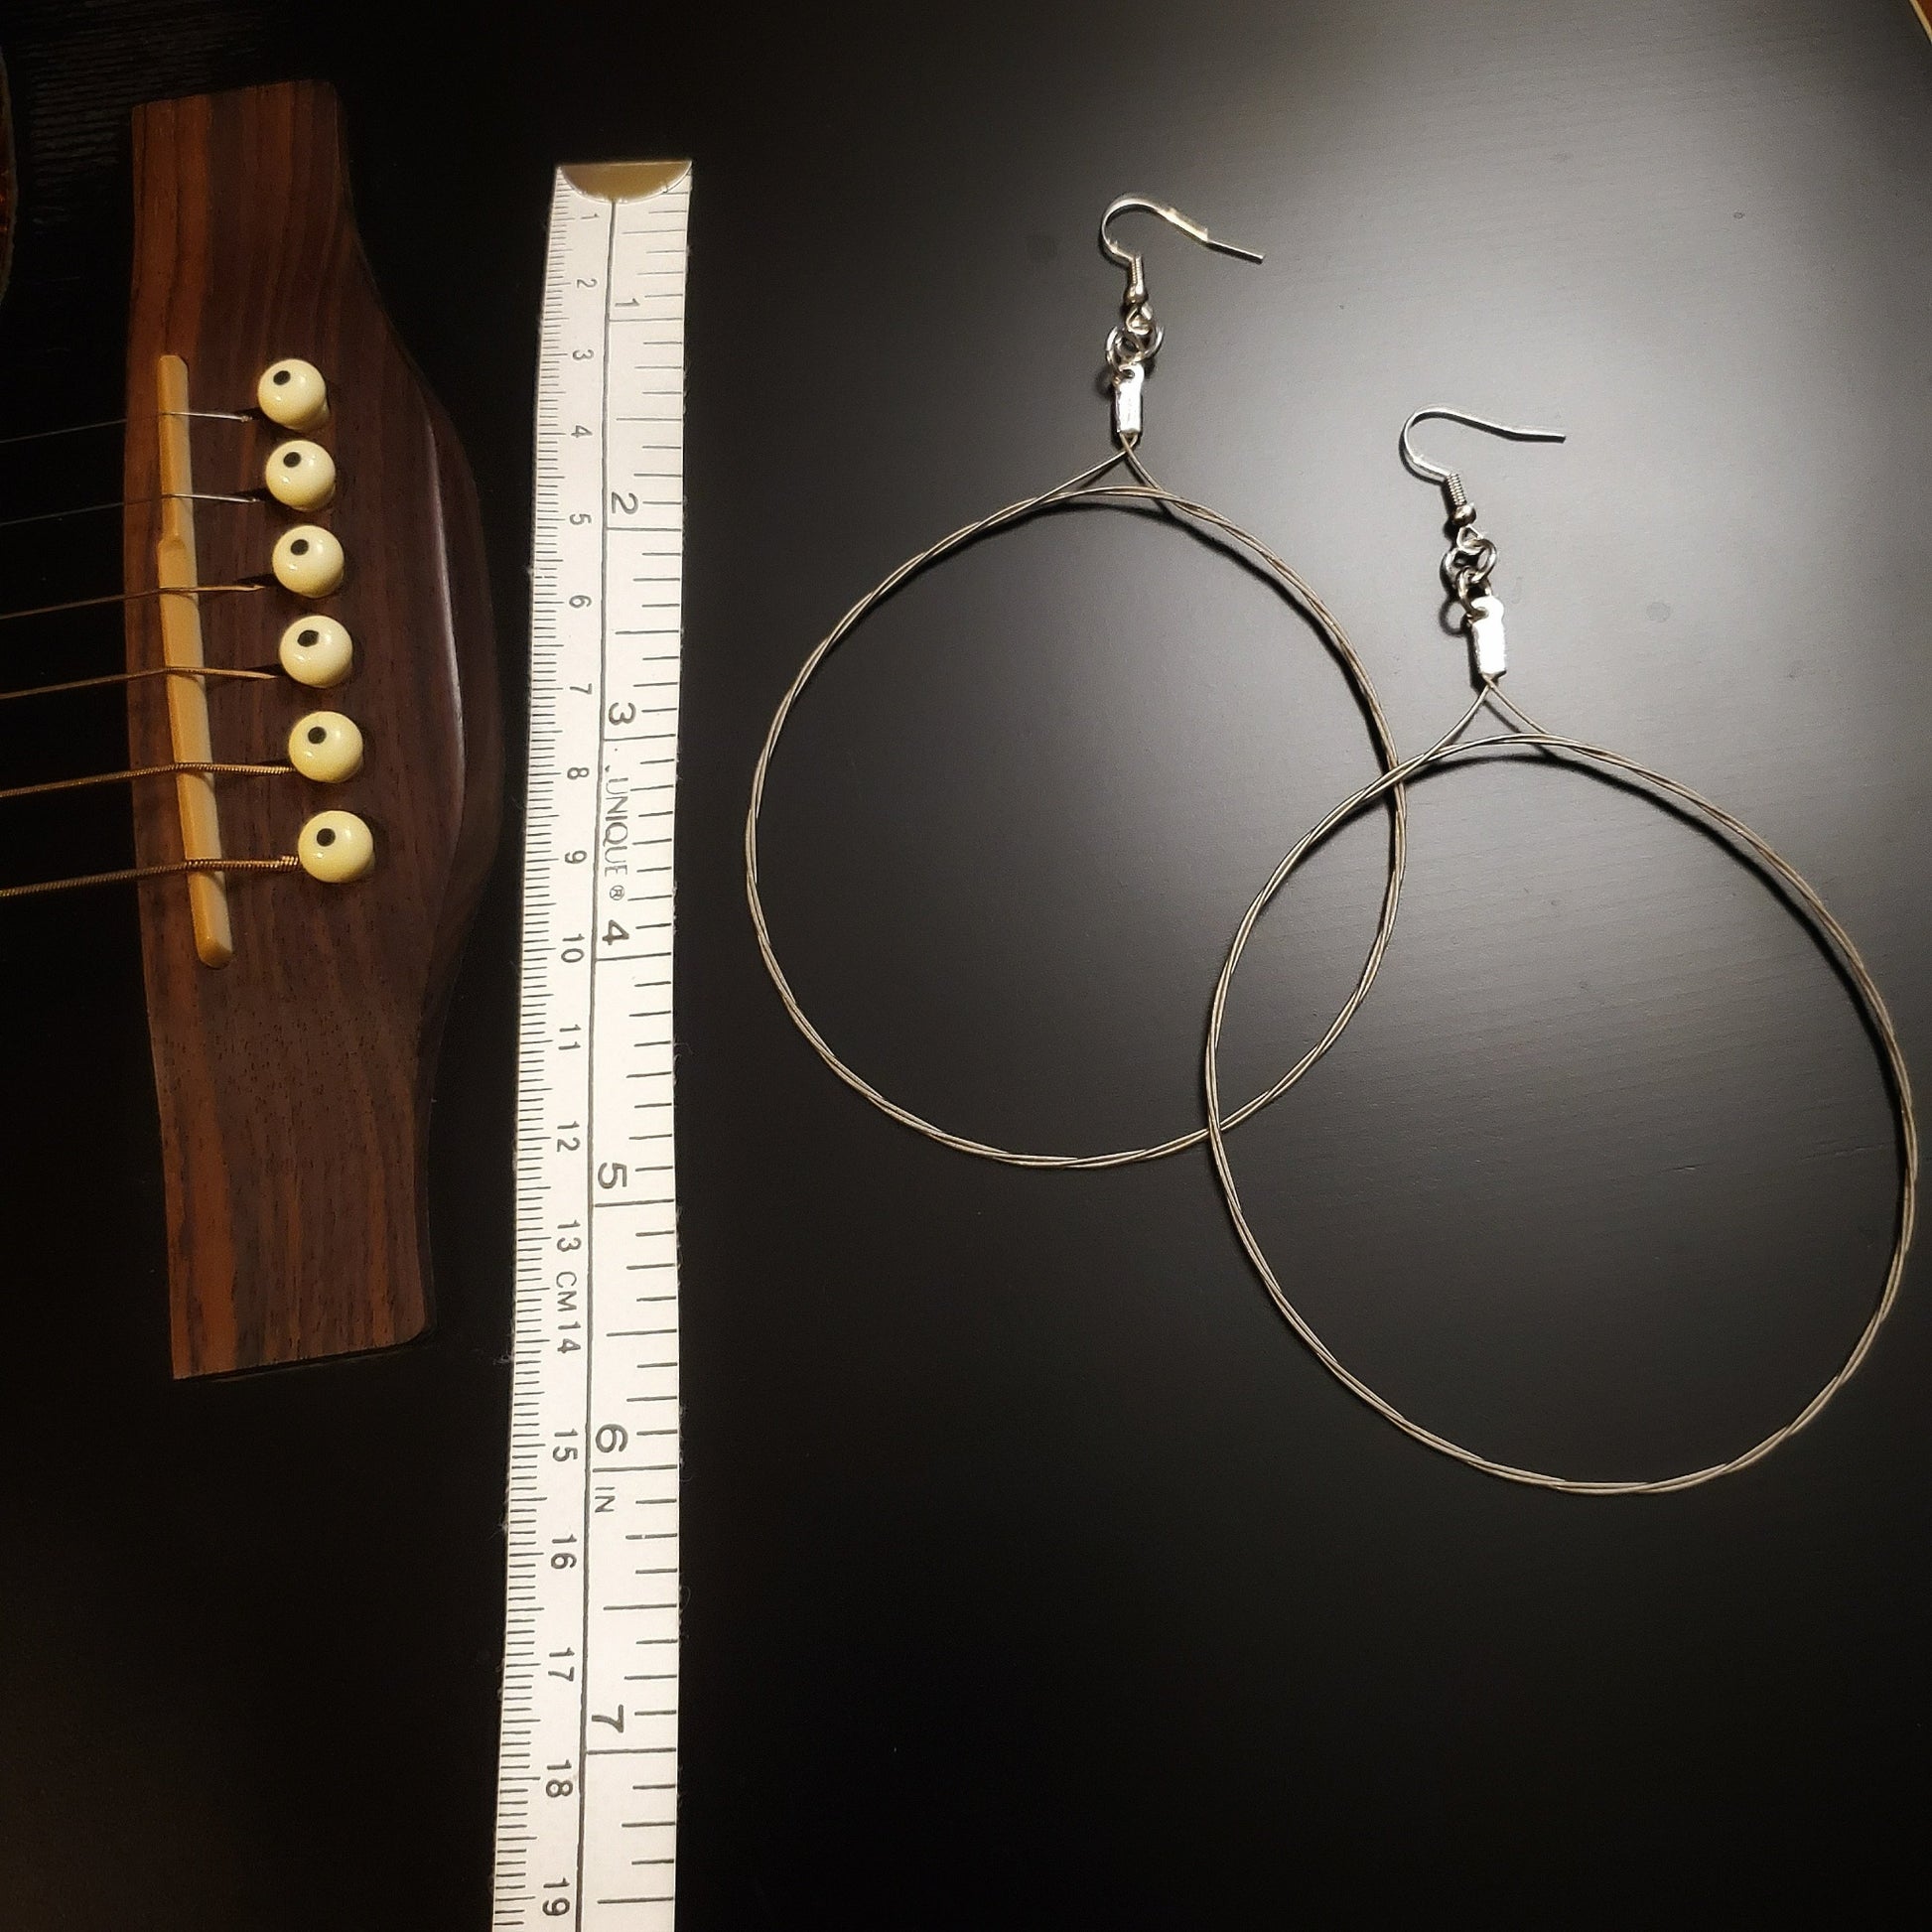 pair of large hoop style earrings made from upcycled guitar strings on the left a white tape measure on the left of which is the bridge of a black guitar